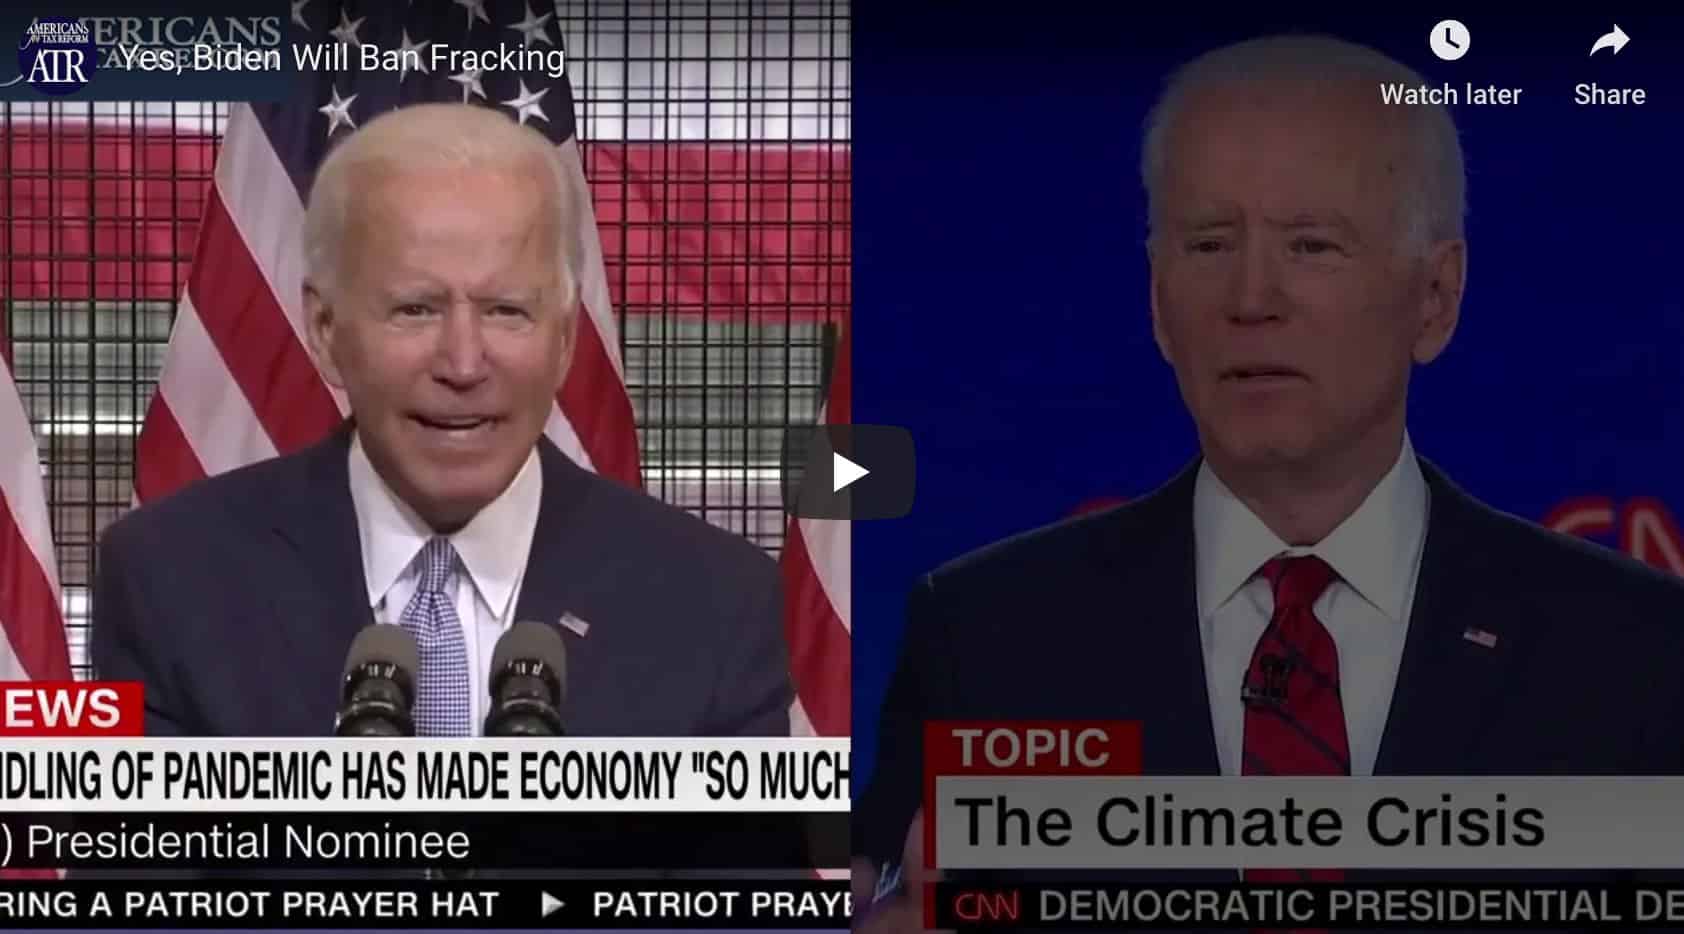 Yes, Joe Biden has said multiple times he would ban fracking. Now he is lying about it.